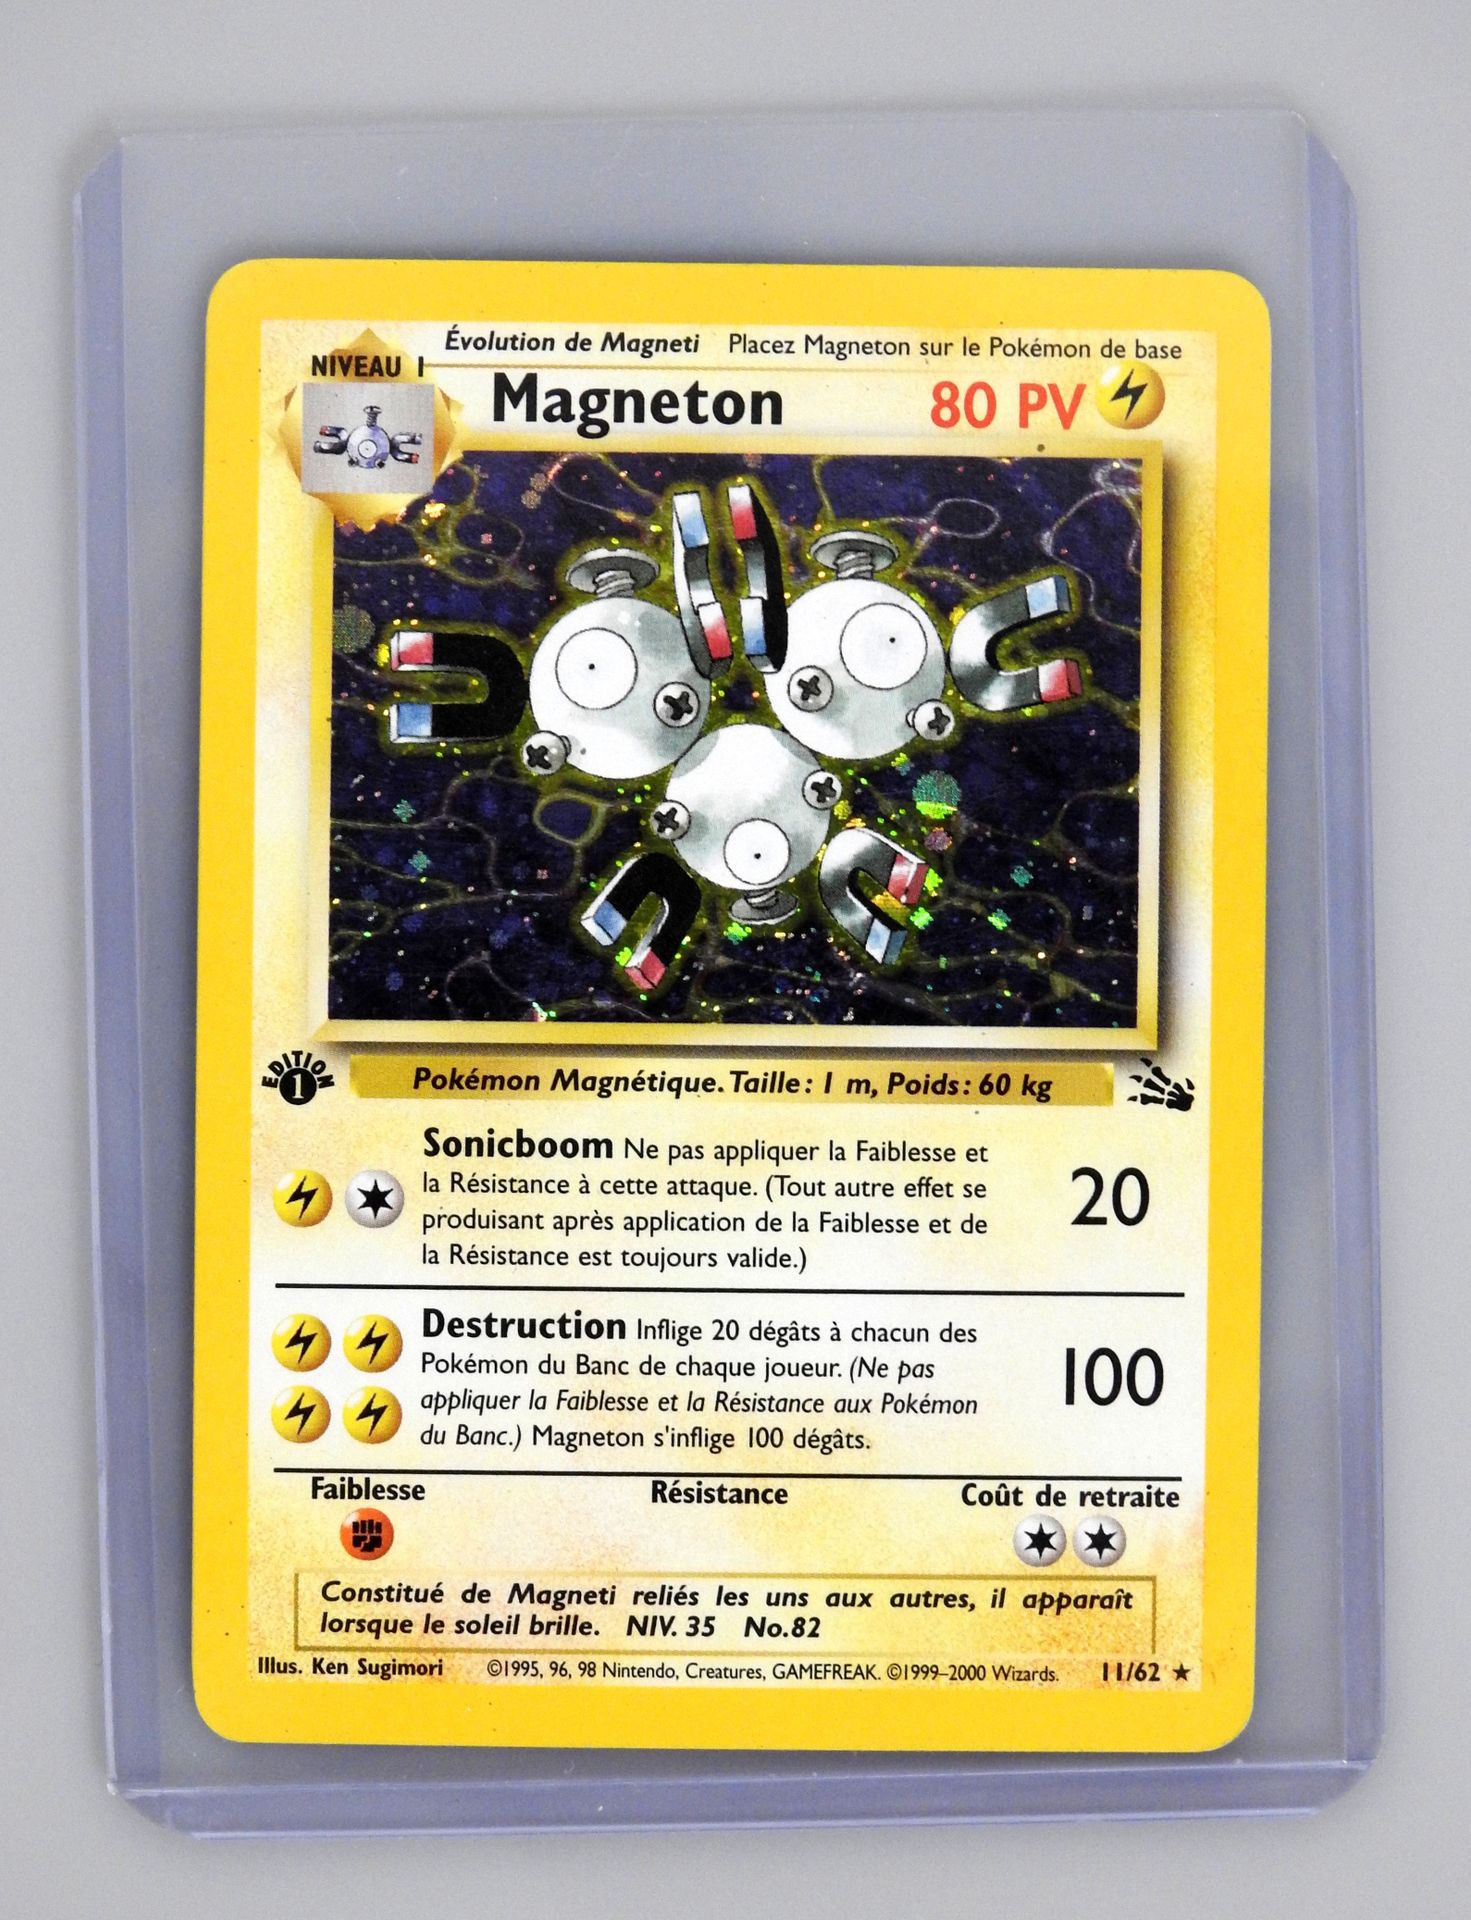 Null MAGNETON Ed 1

Wizards Fossil Block 11/62

Pokemon card in good condition